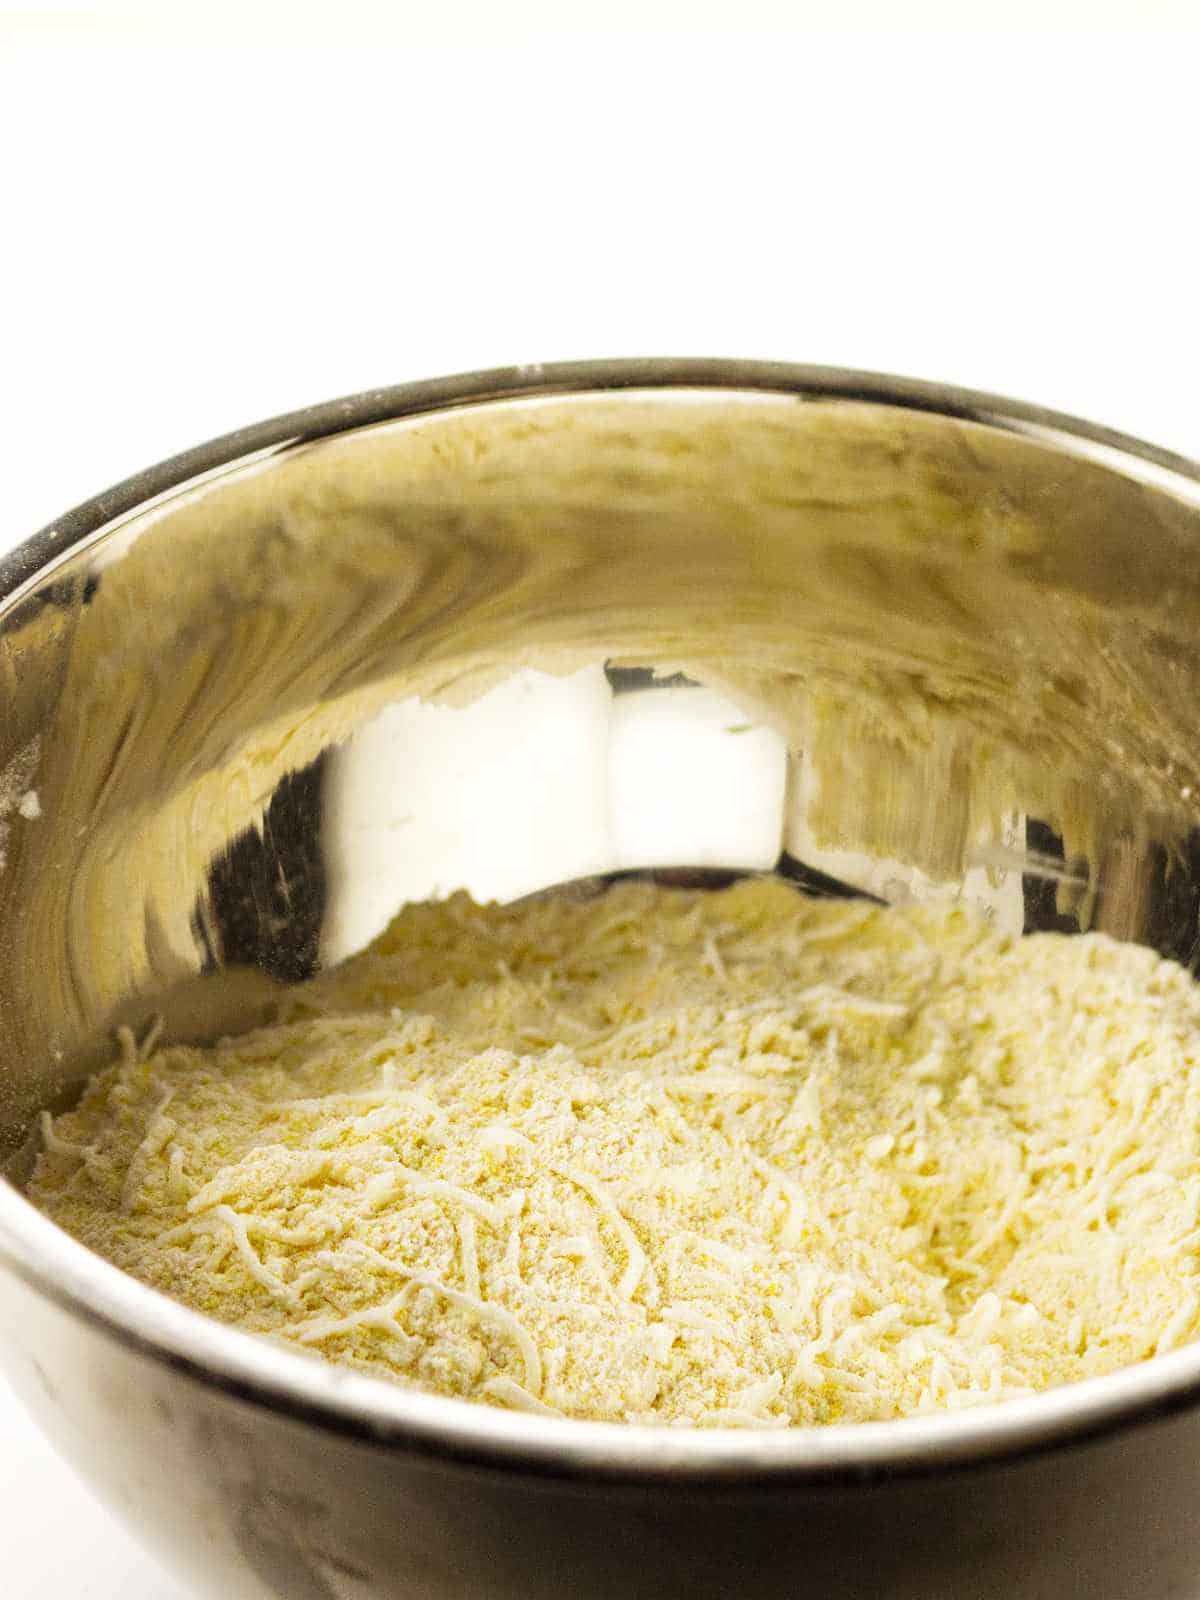 toss the grated cheese in the cornmeal and flour mixture.